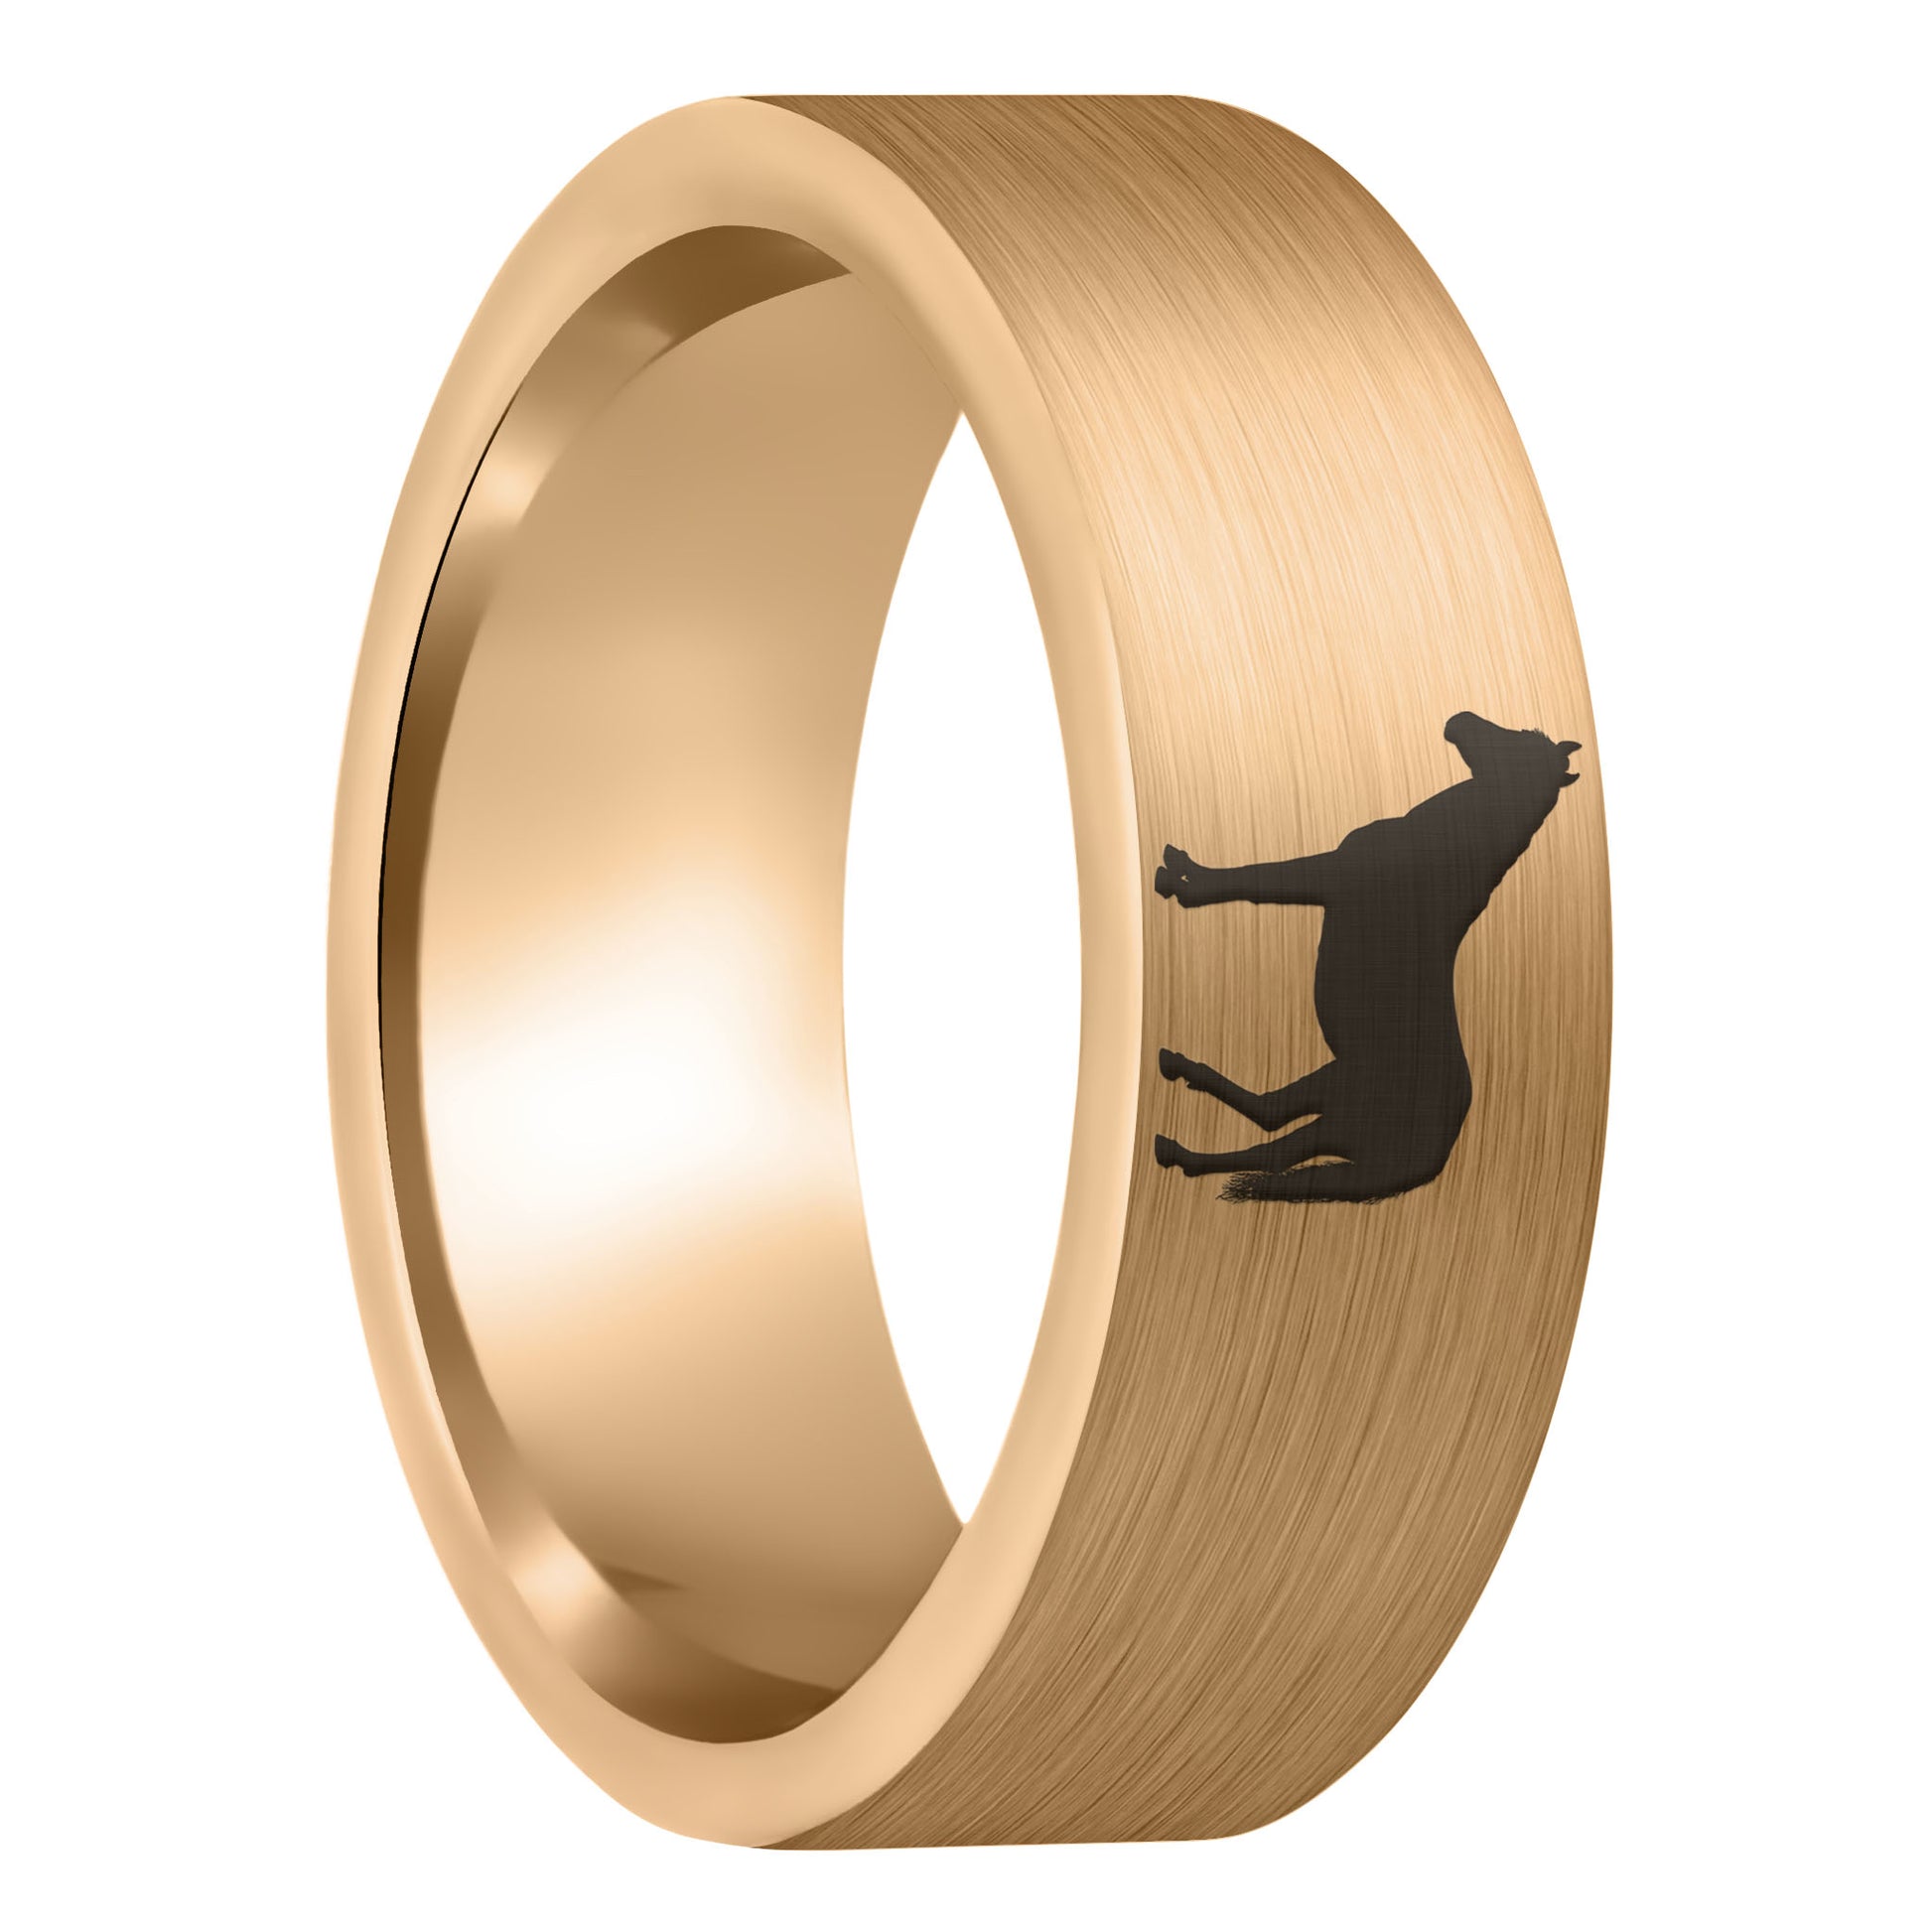 A horse brushed rose gold tungsten men's wedding band displayed on a plain white background.